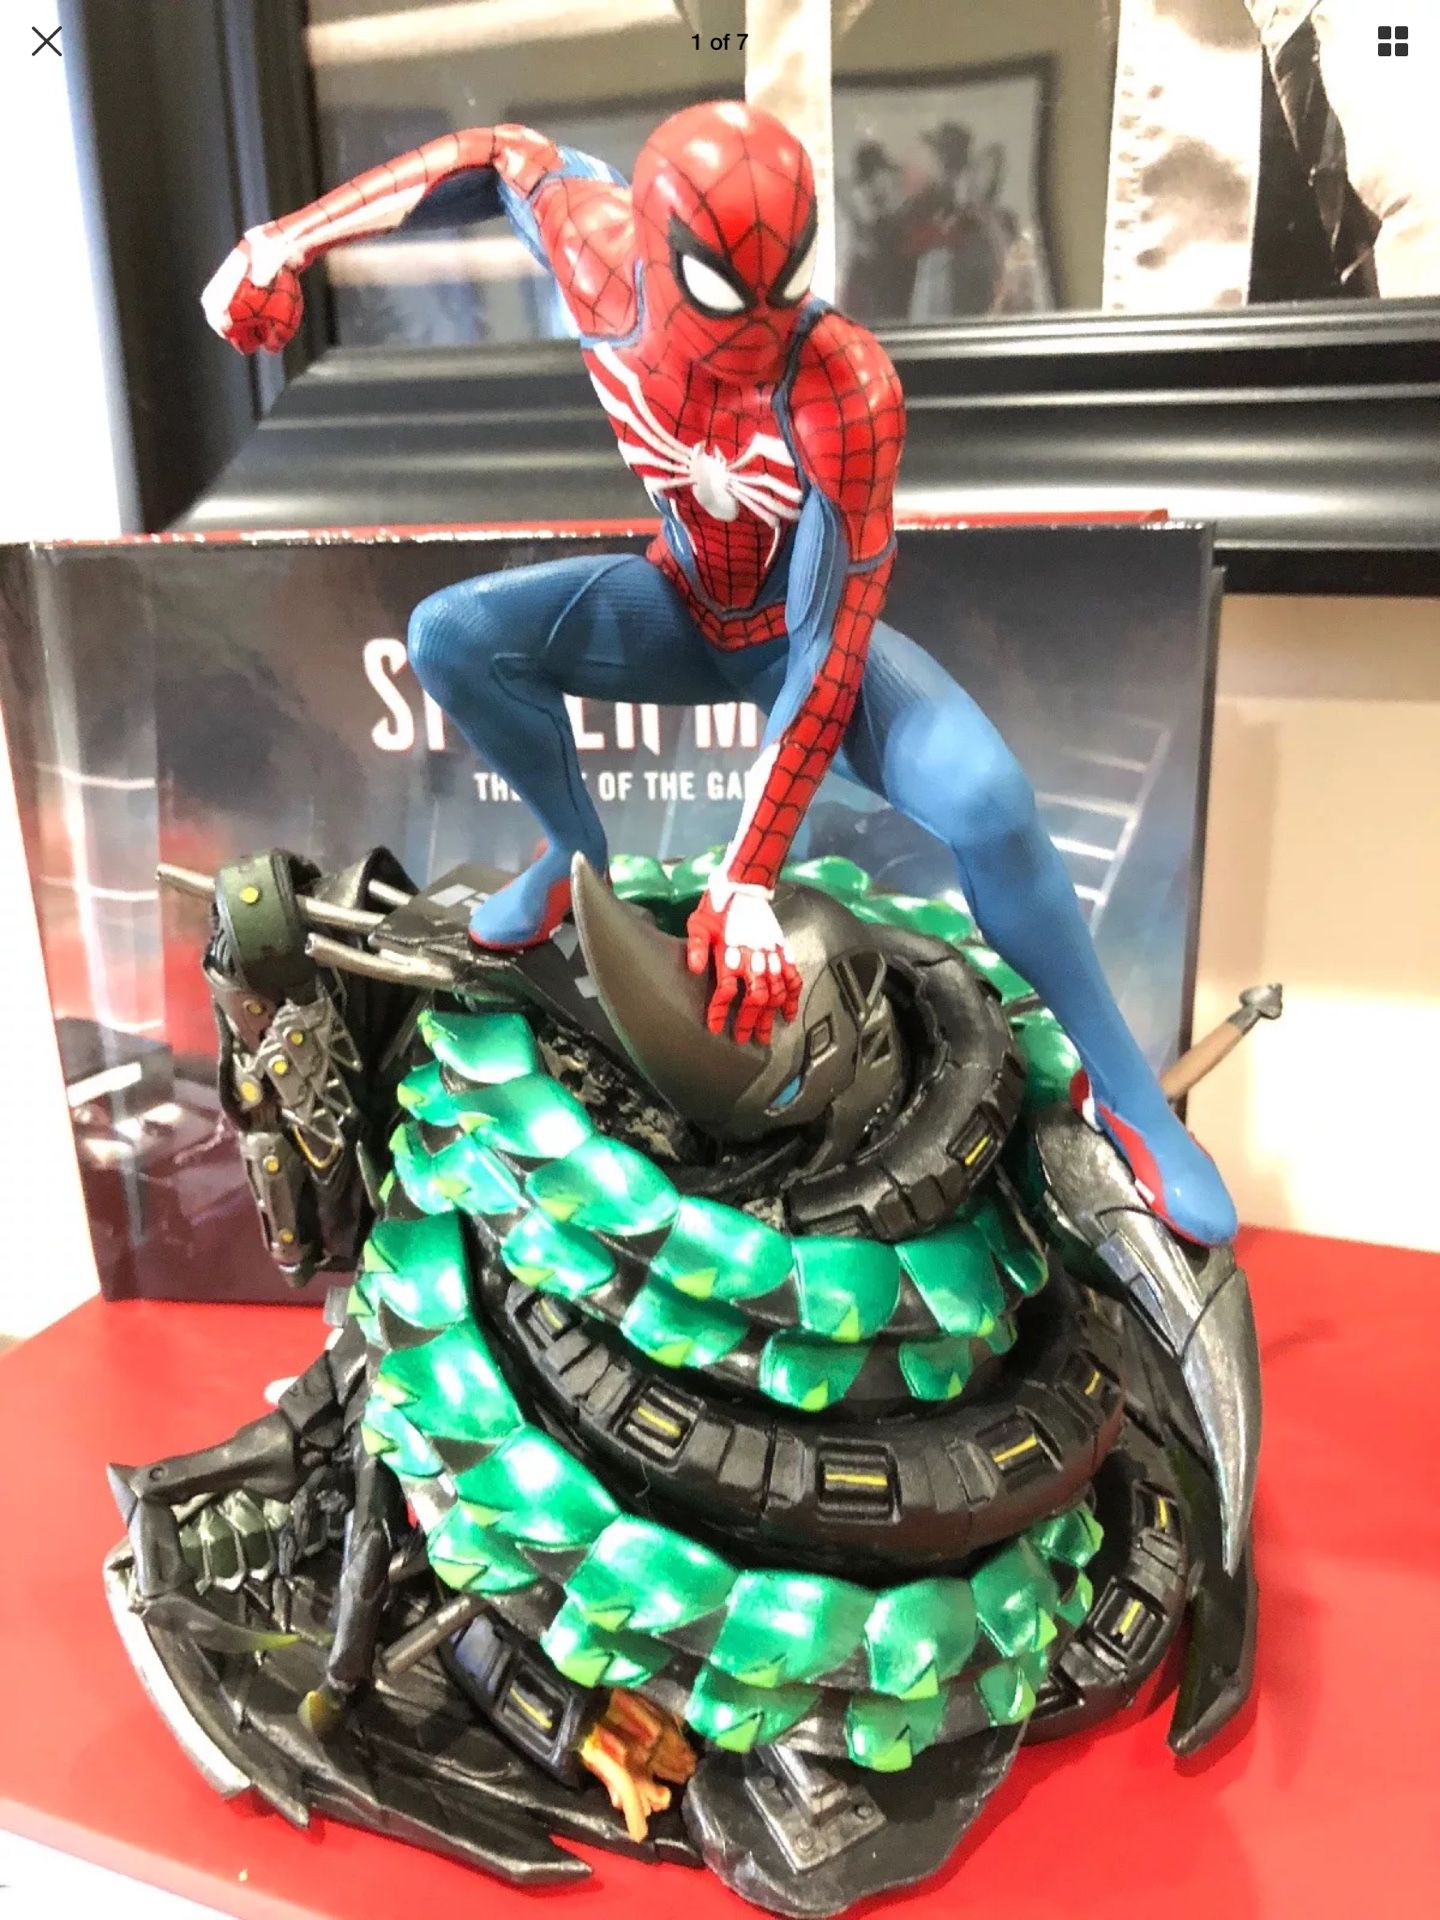 Spider-Man Collectors Edition - PS4 Pro - Statue + artbook bundle - NO GAME  or SYSTEM included for Sale in San Leandro, CA - OfferUp